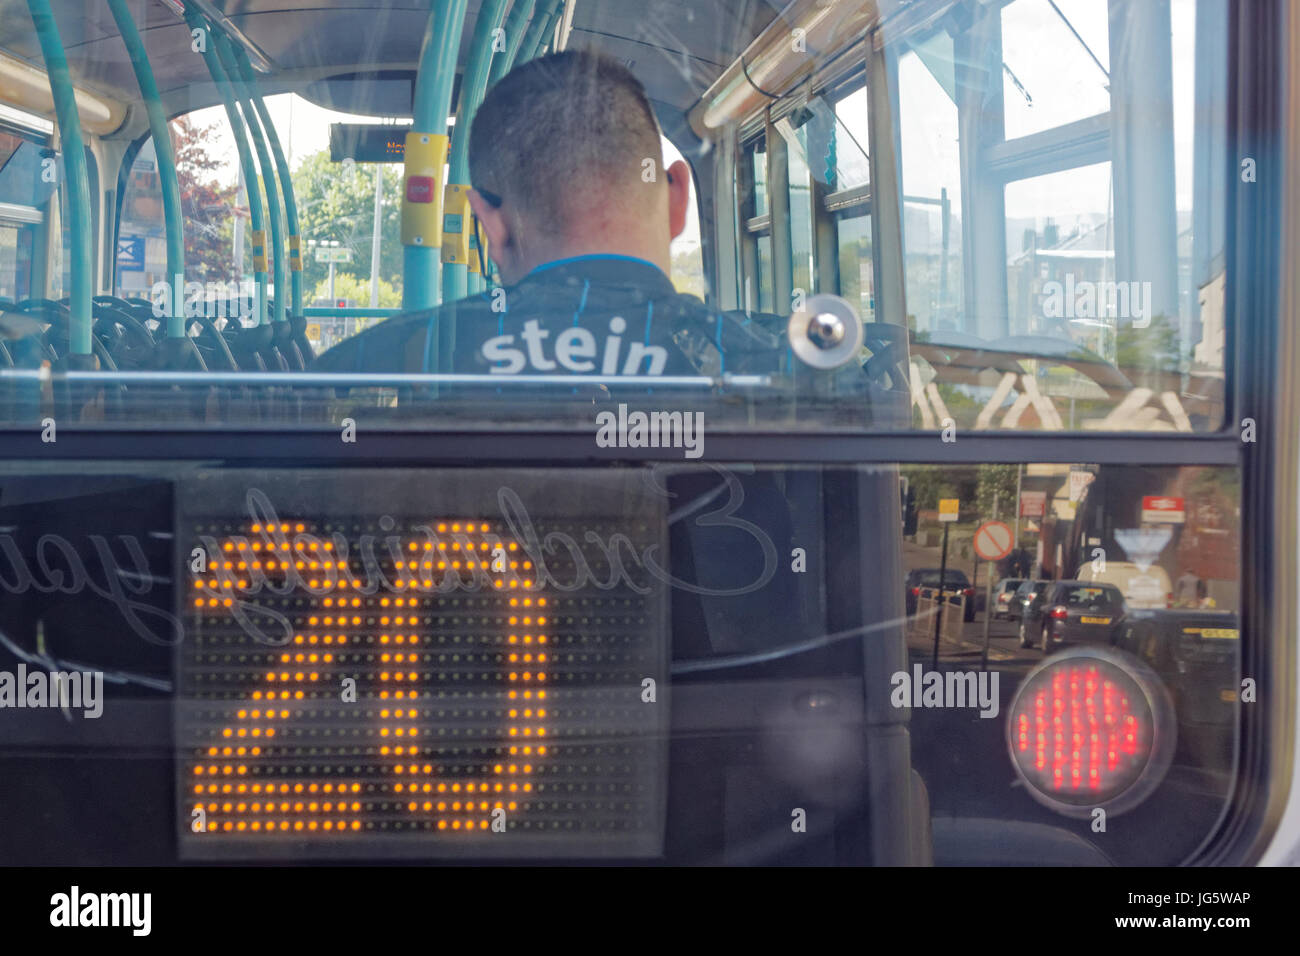 football top with stein name boy sitting on a bus with its number taking the place of the football strip number  red light concept shot Stock Photo